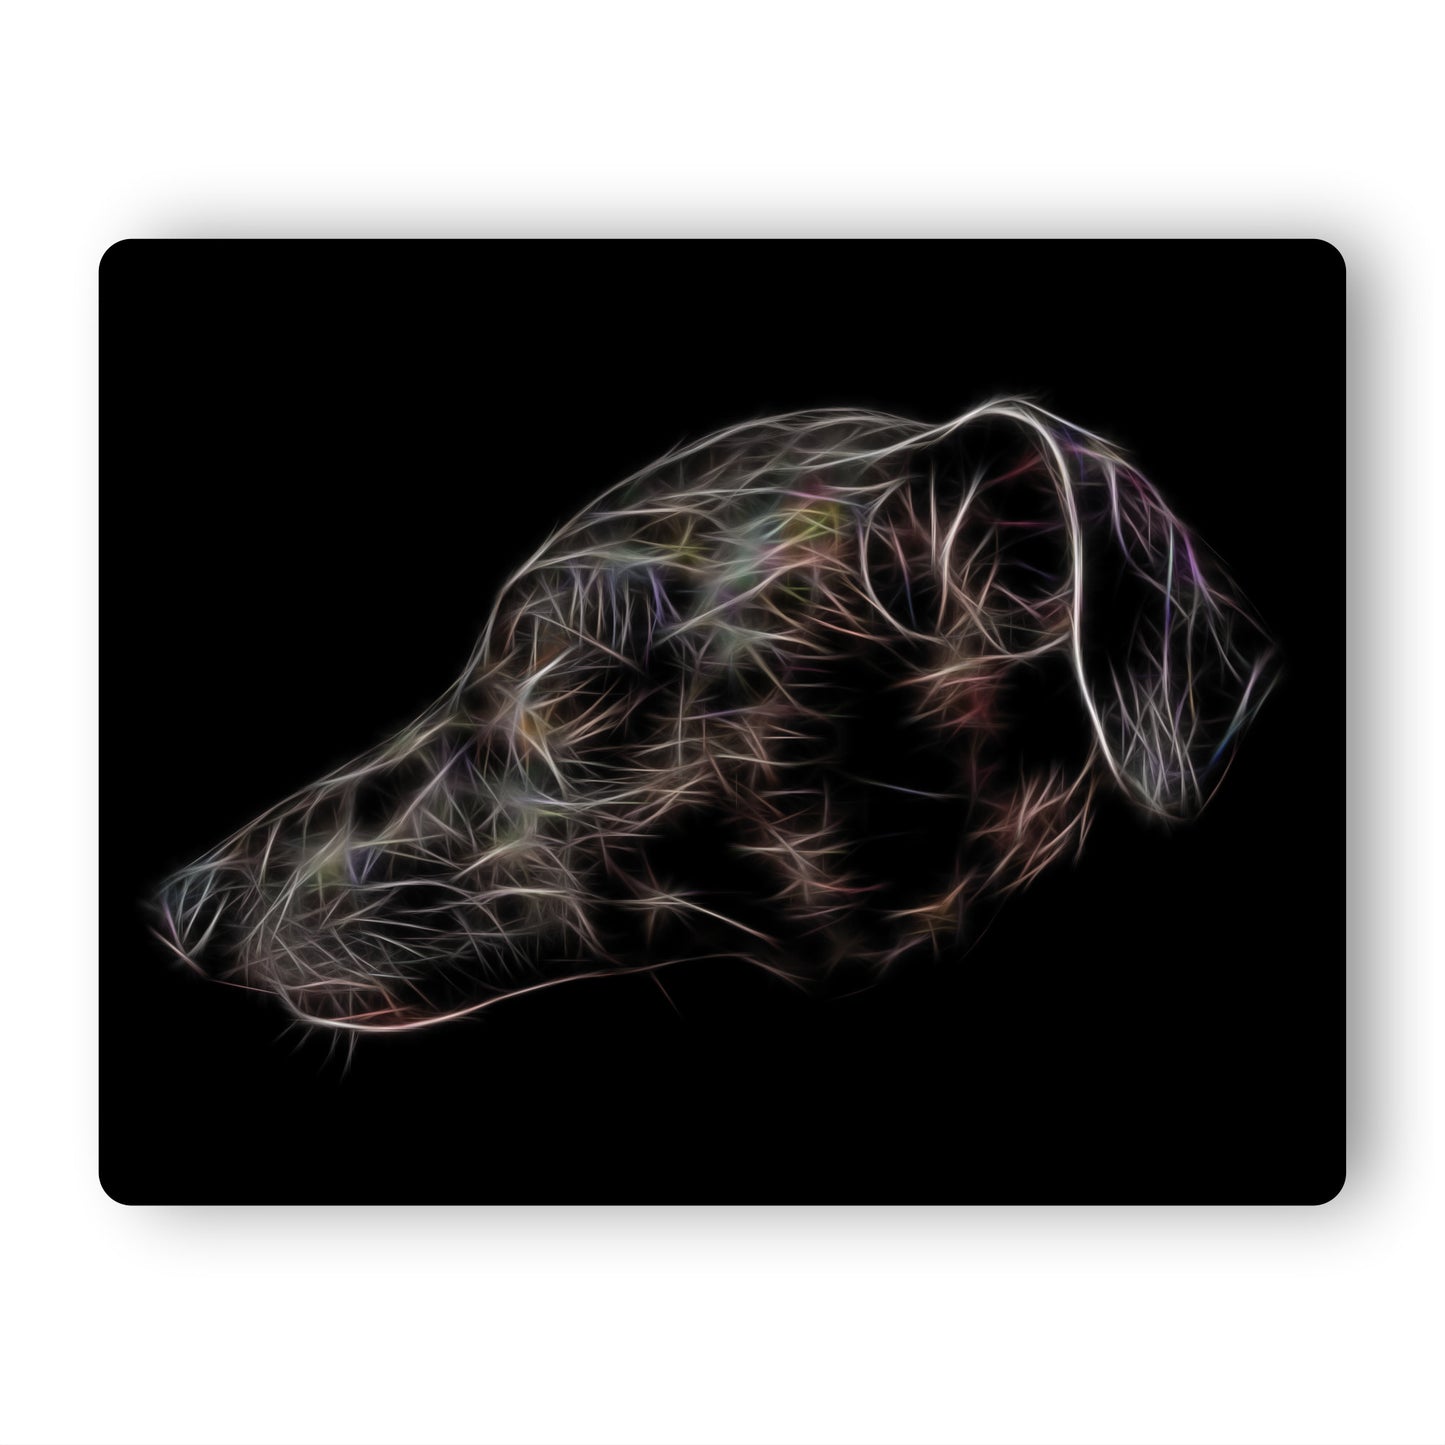 Italian Greyhound Metal Wall Plaque with Fractal Art Design,  Perfect Dog Owner Gift.